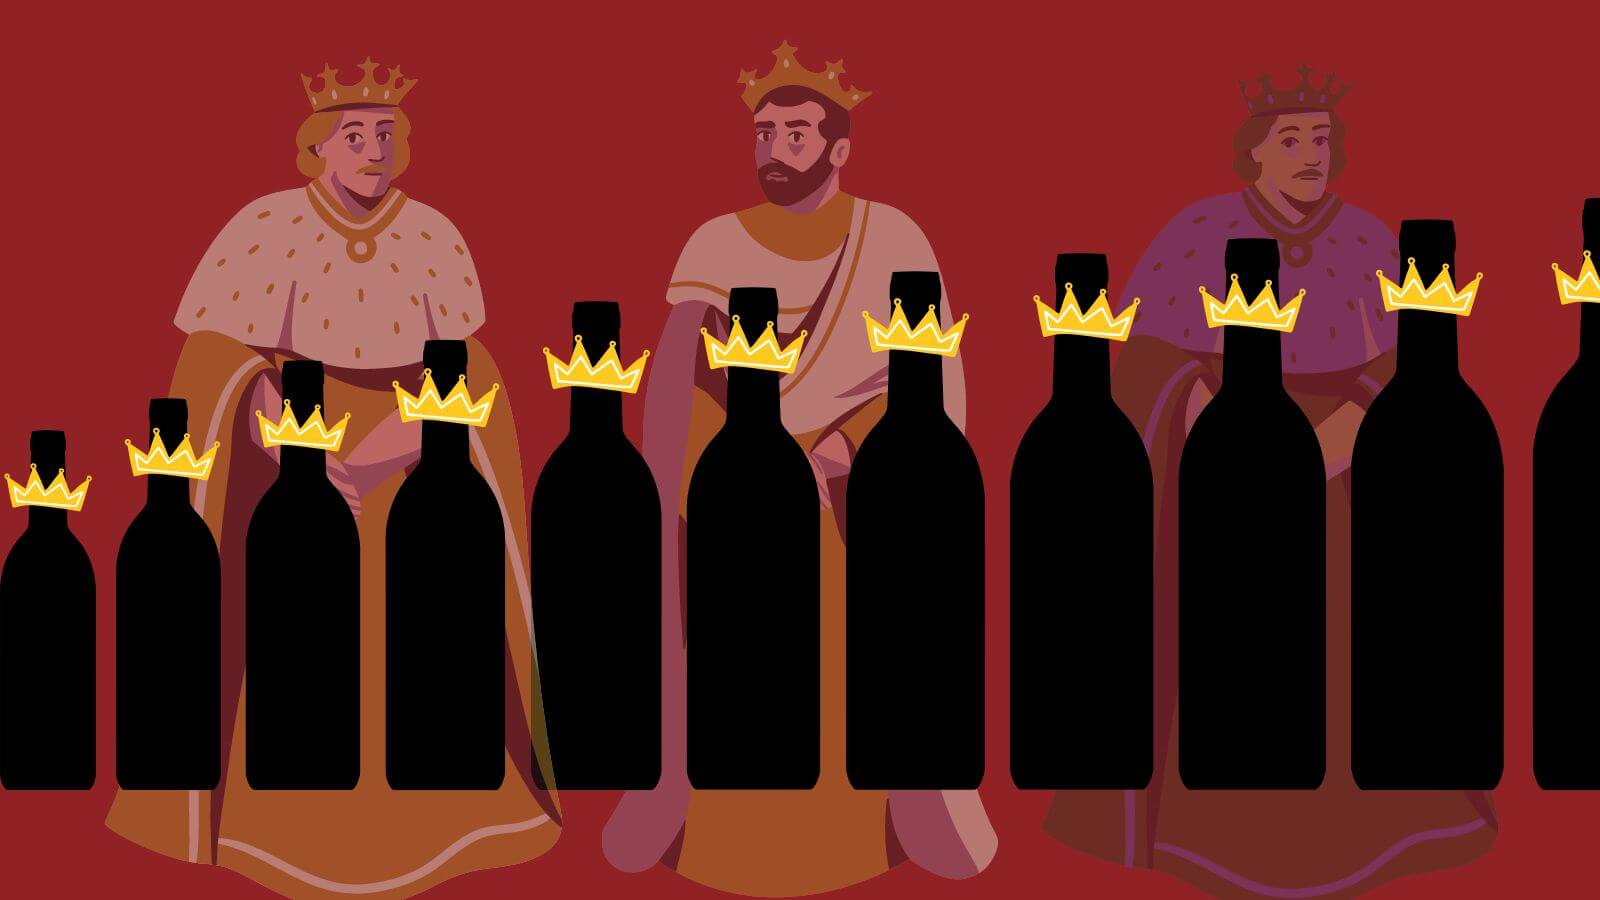 The kings behind the wines.